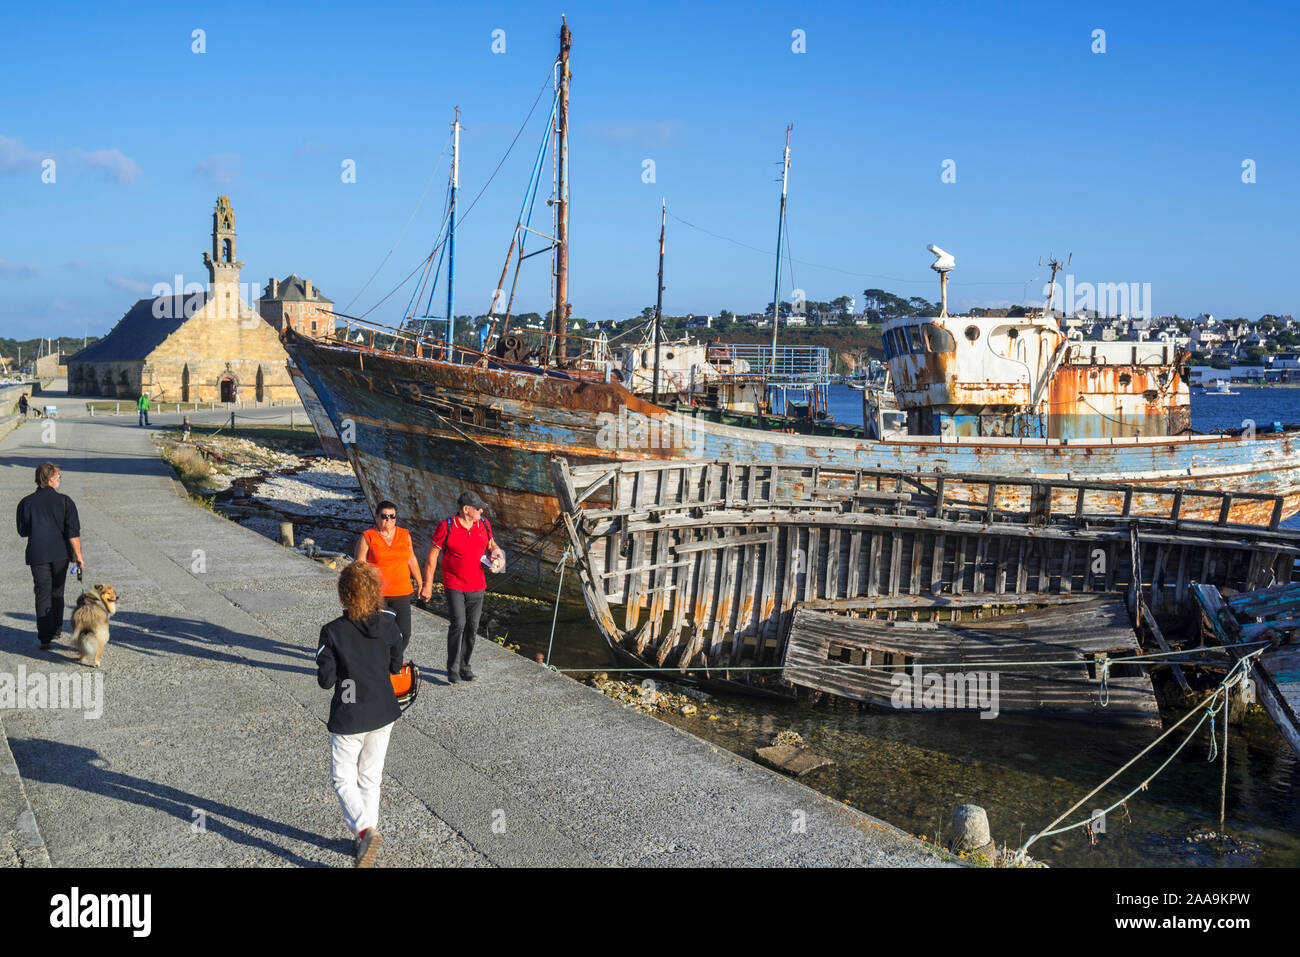 Tourists visiting wrecks of old wooden trawler fishing boats / lobster boats in the harbour / port of Camaret-sur-Mer, Finistère, Brittany, France Stock Photo